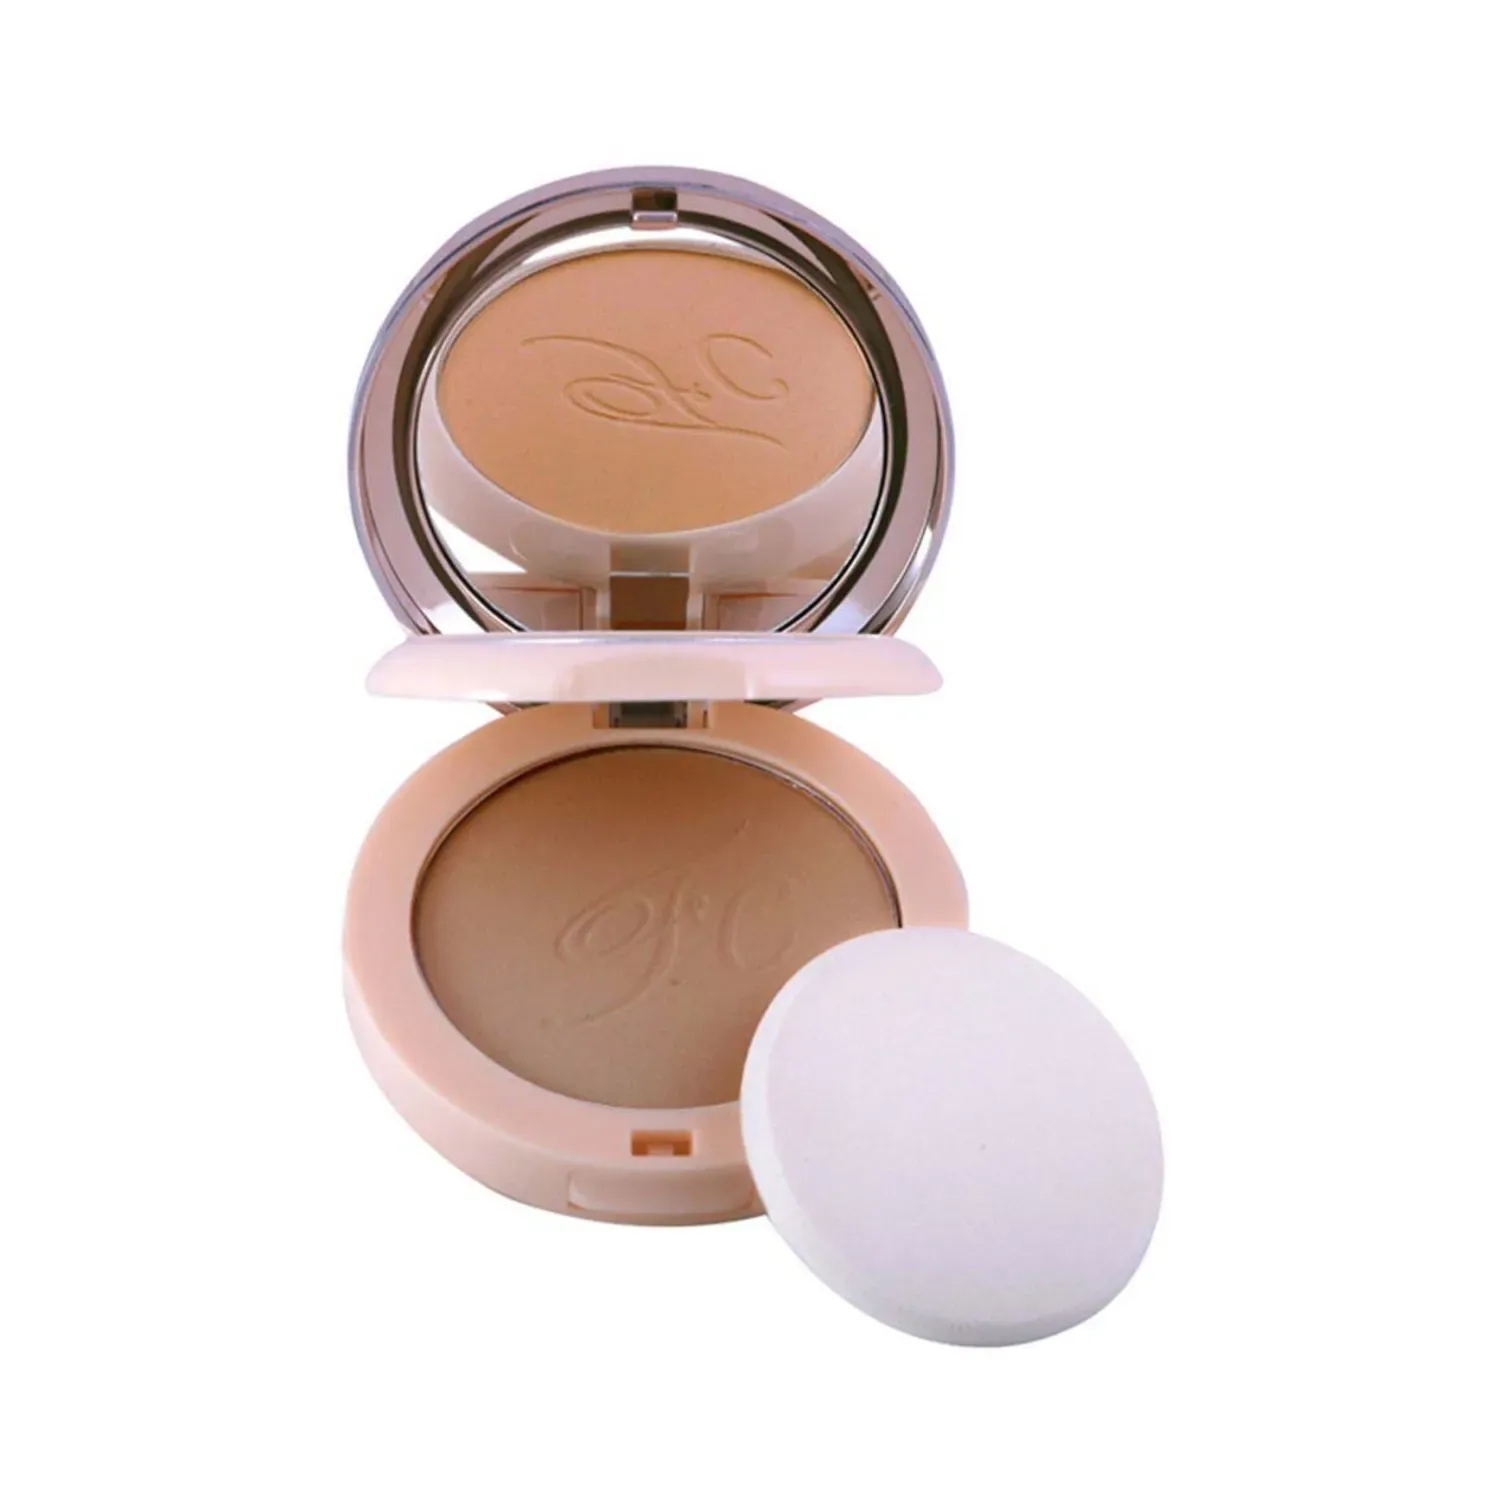 Fashion Colour Nude Makeover 2-In-1 Compact Face Powder - 06 Shade (20g)